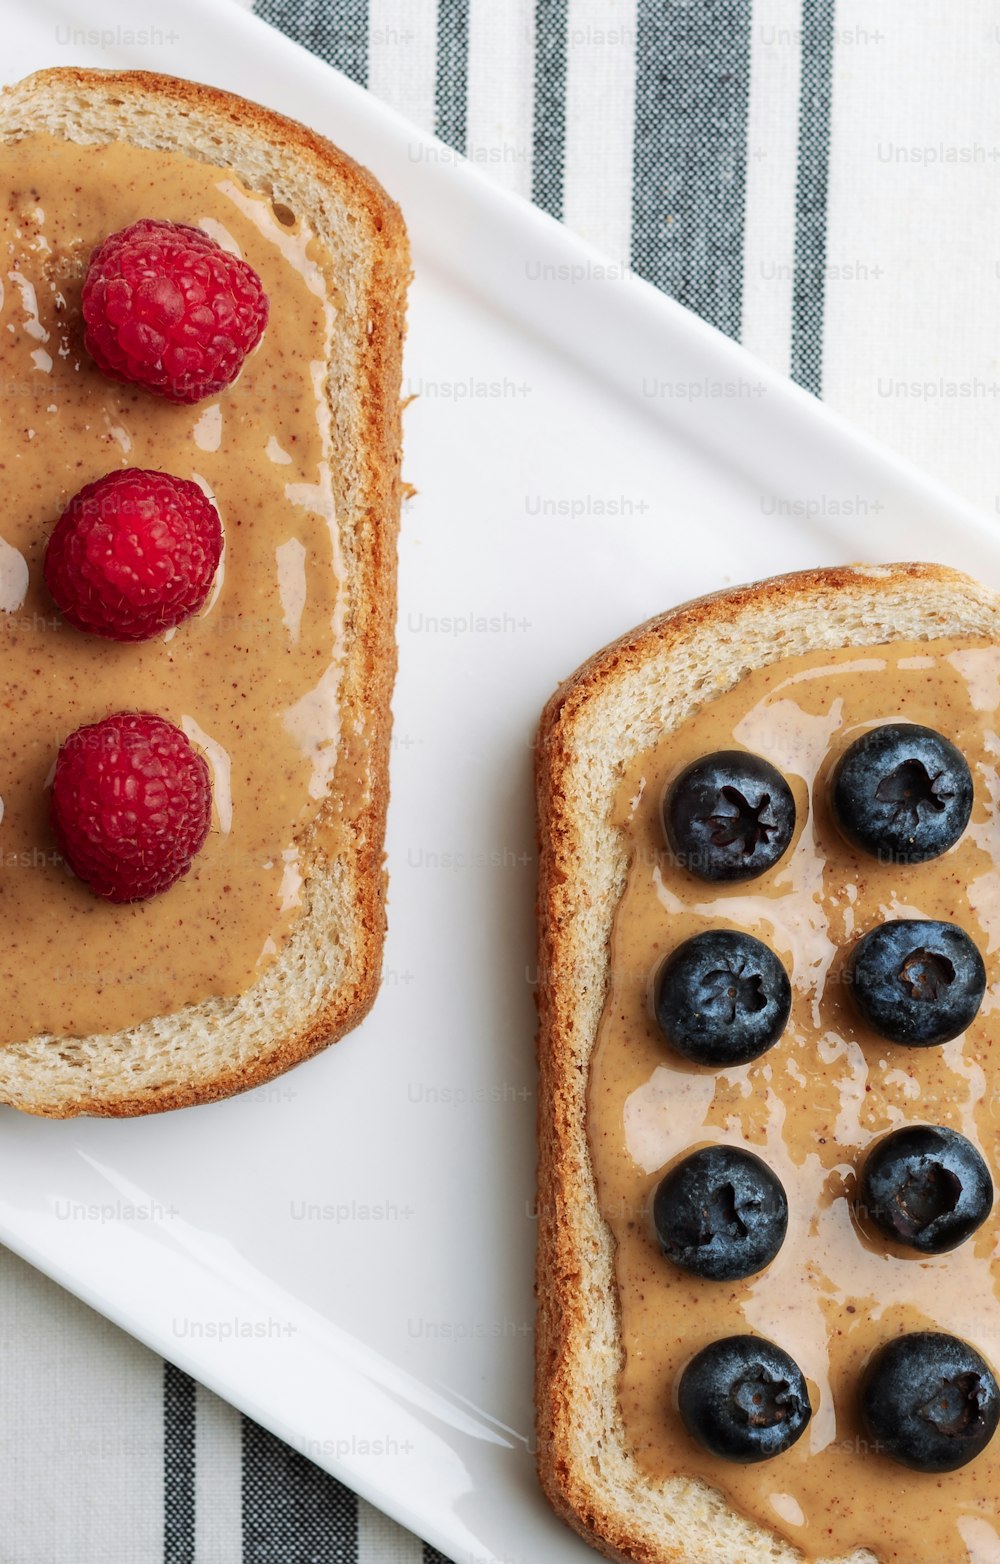 two pieces of bread with peanut butter and berries on them